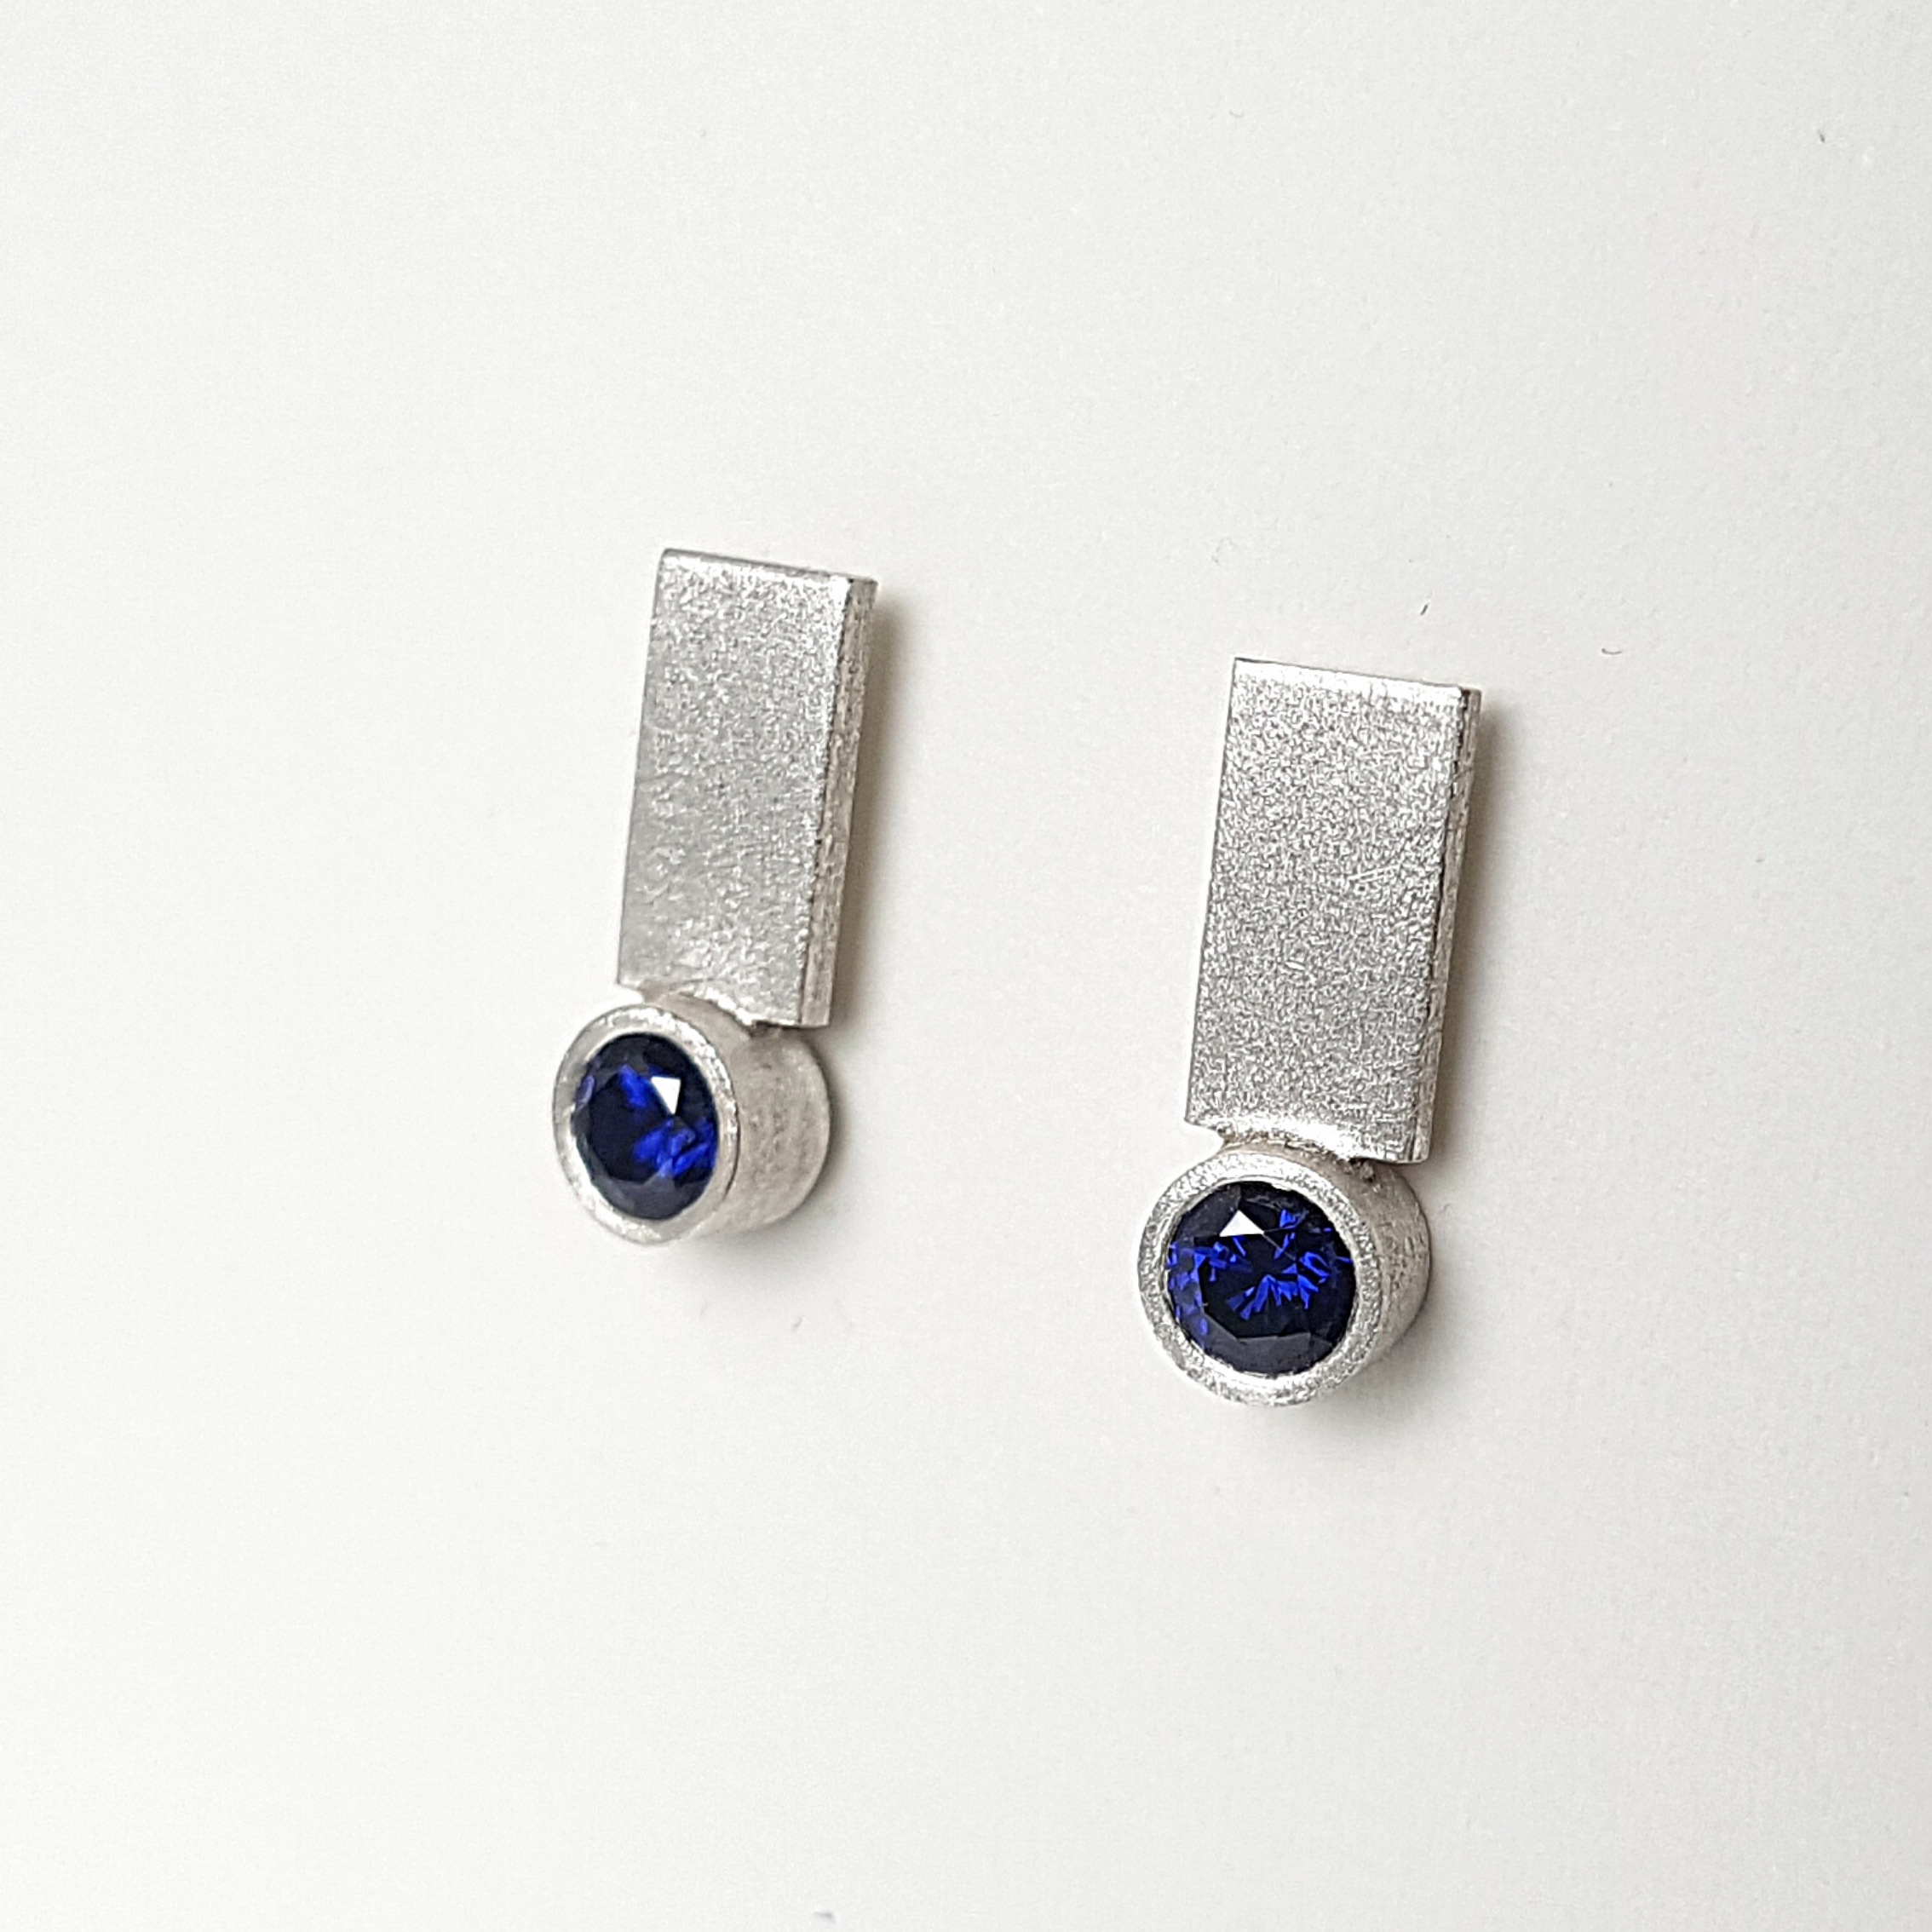 Sterling silver earrings with dark blue cubic zirconia are hanging on a white stand.